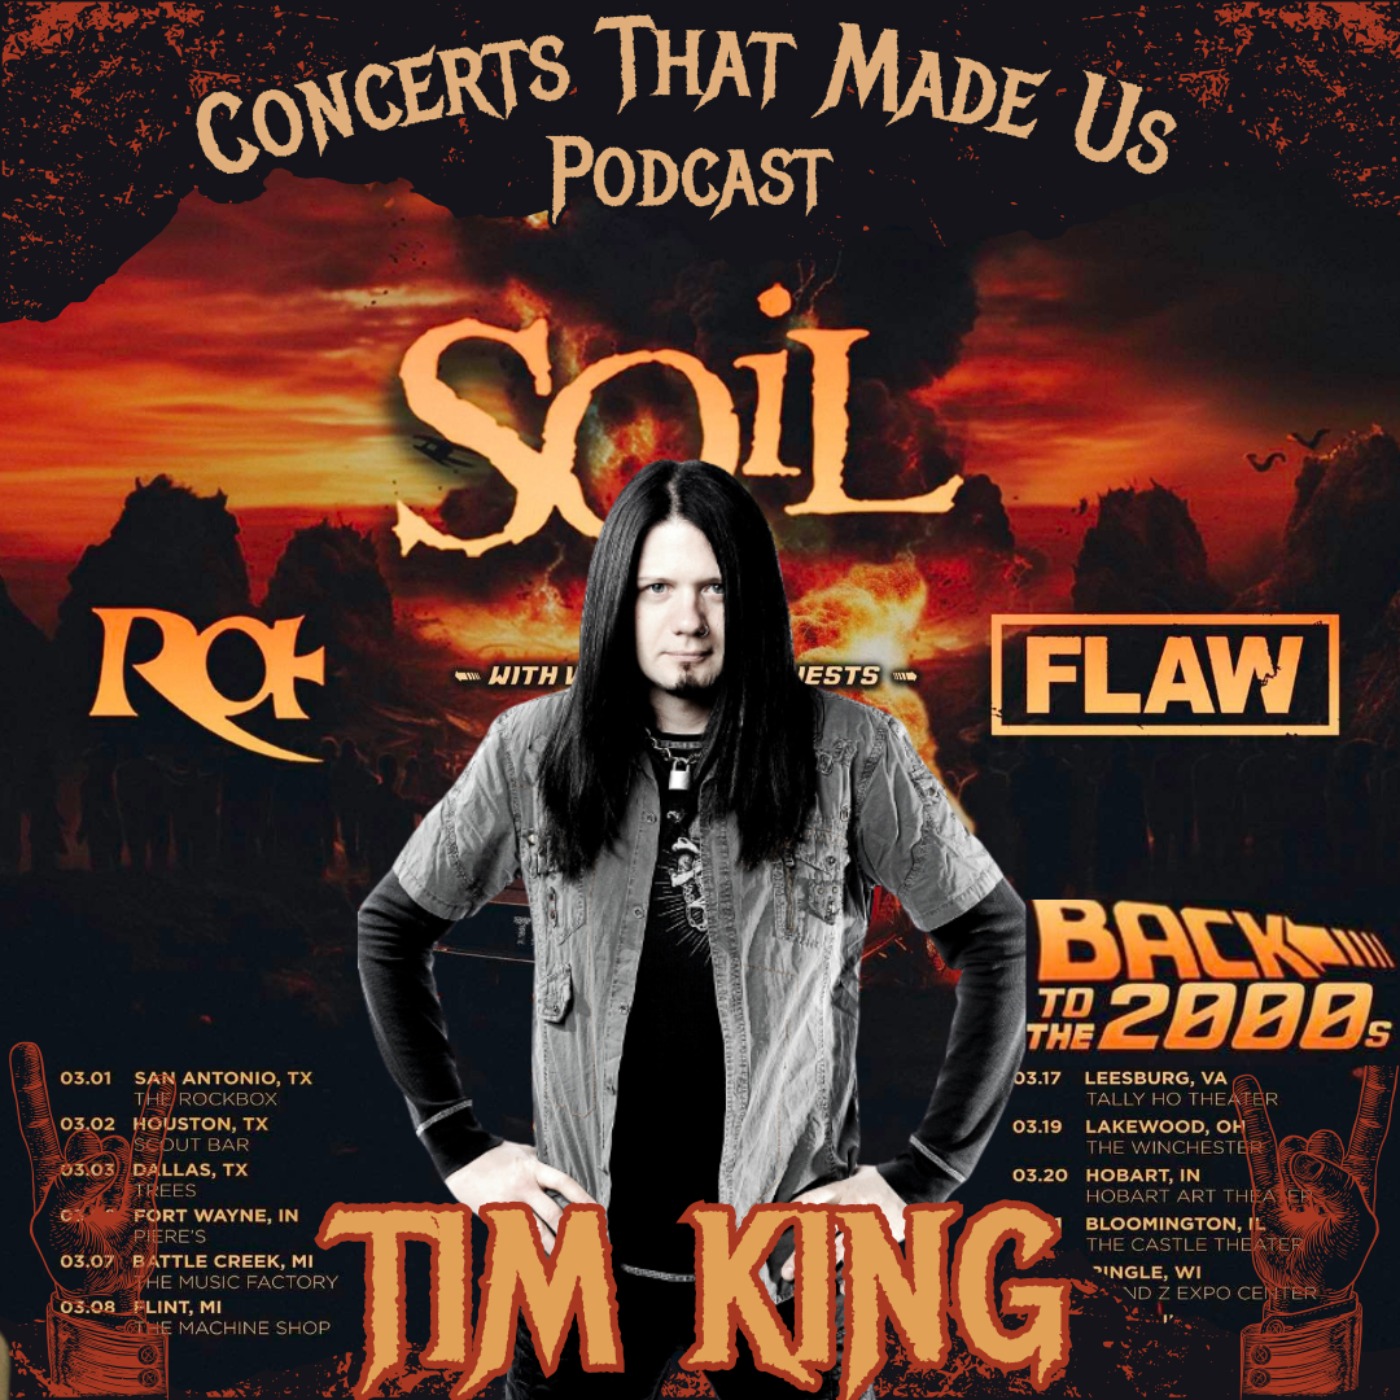 Soil's Tim King Chats about the Back to the 2000s Tour